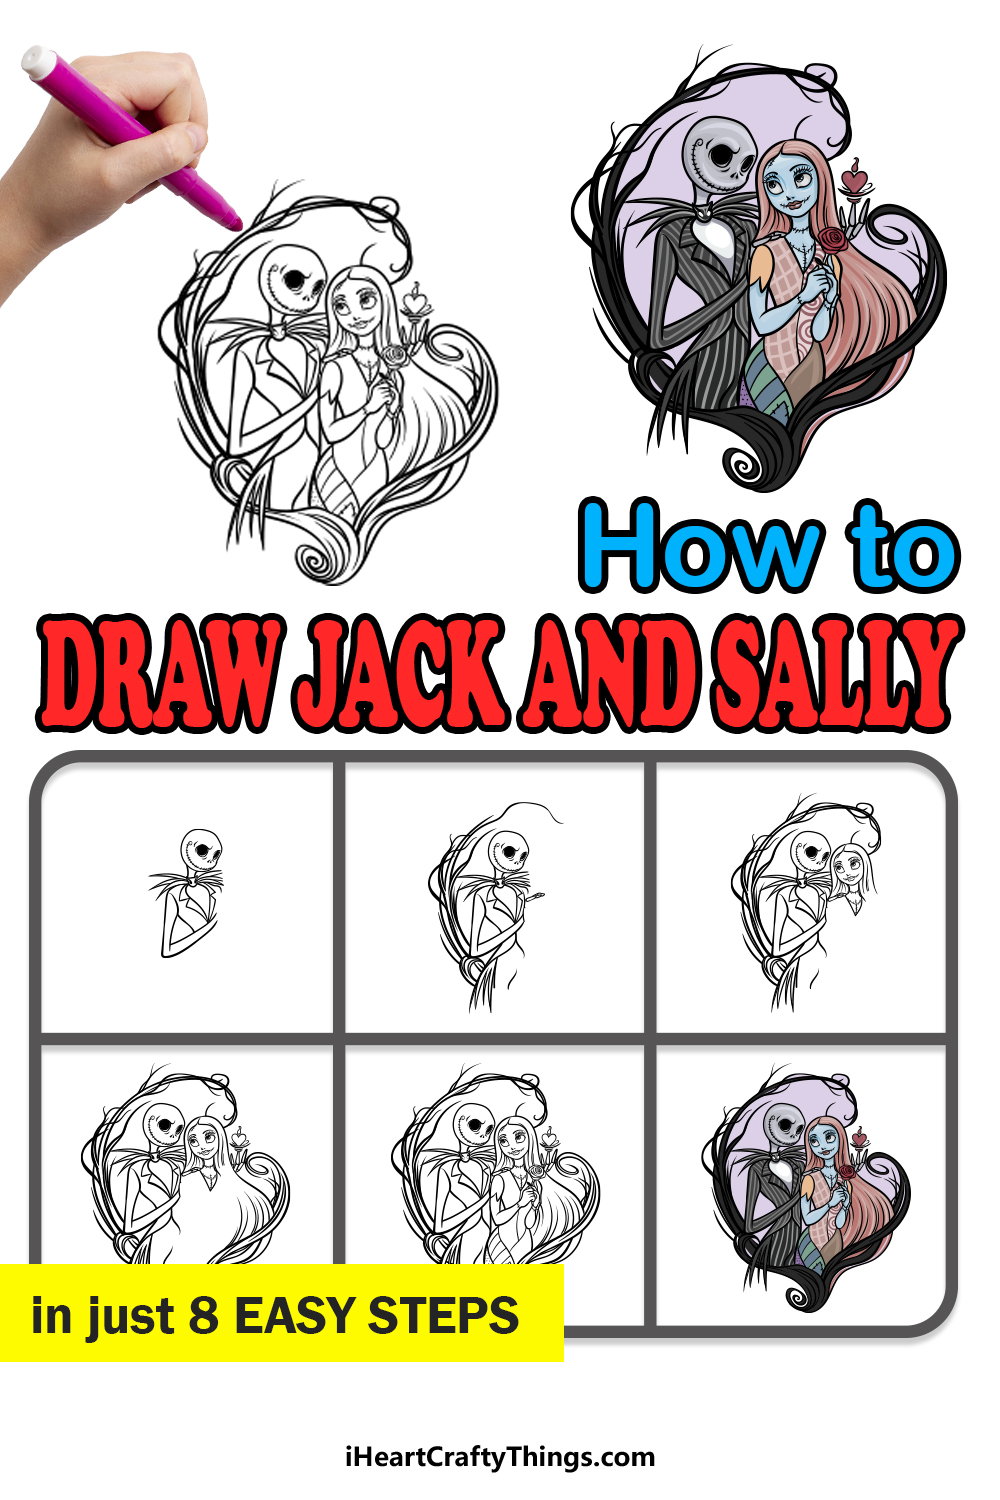 how to draw Jack and Sally in 8 easy steps